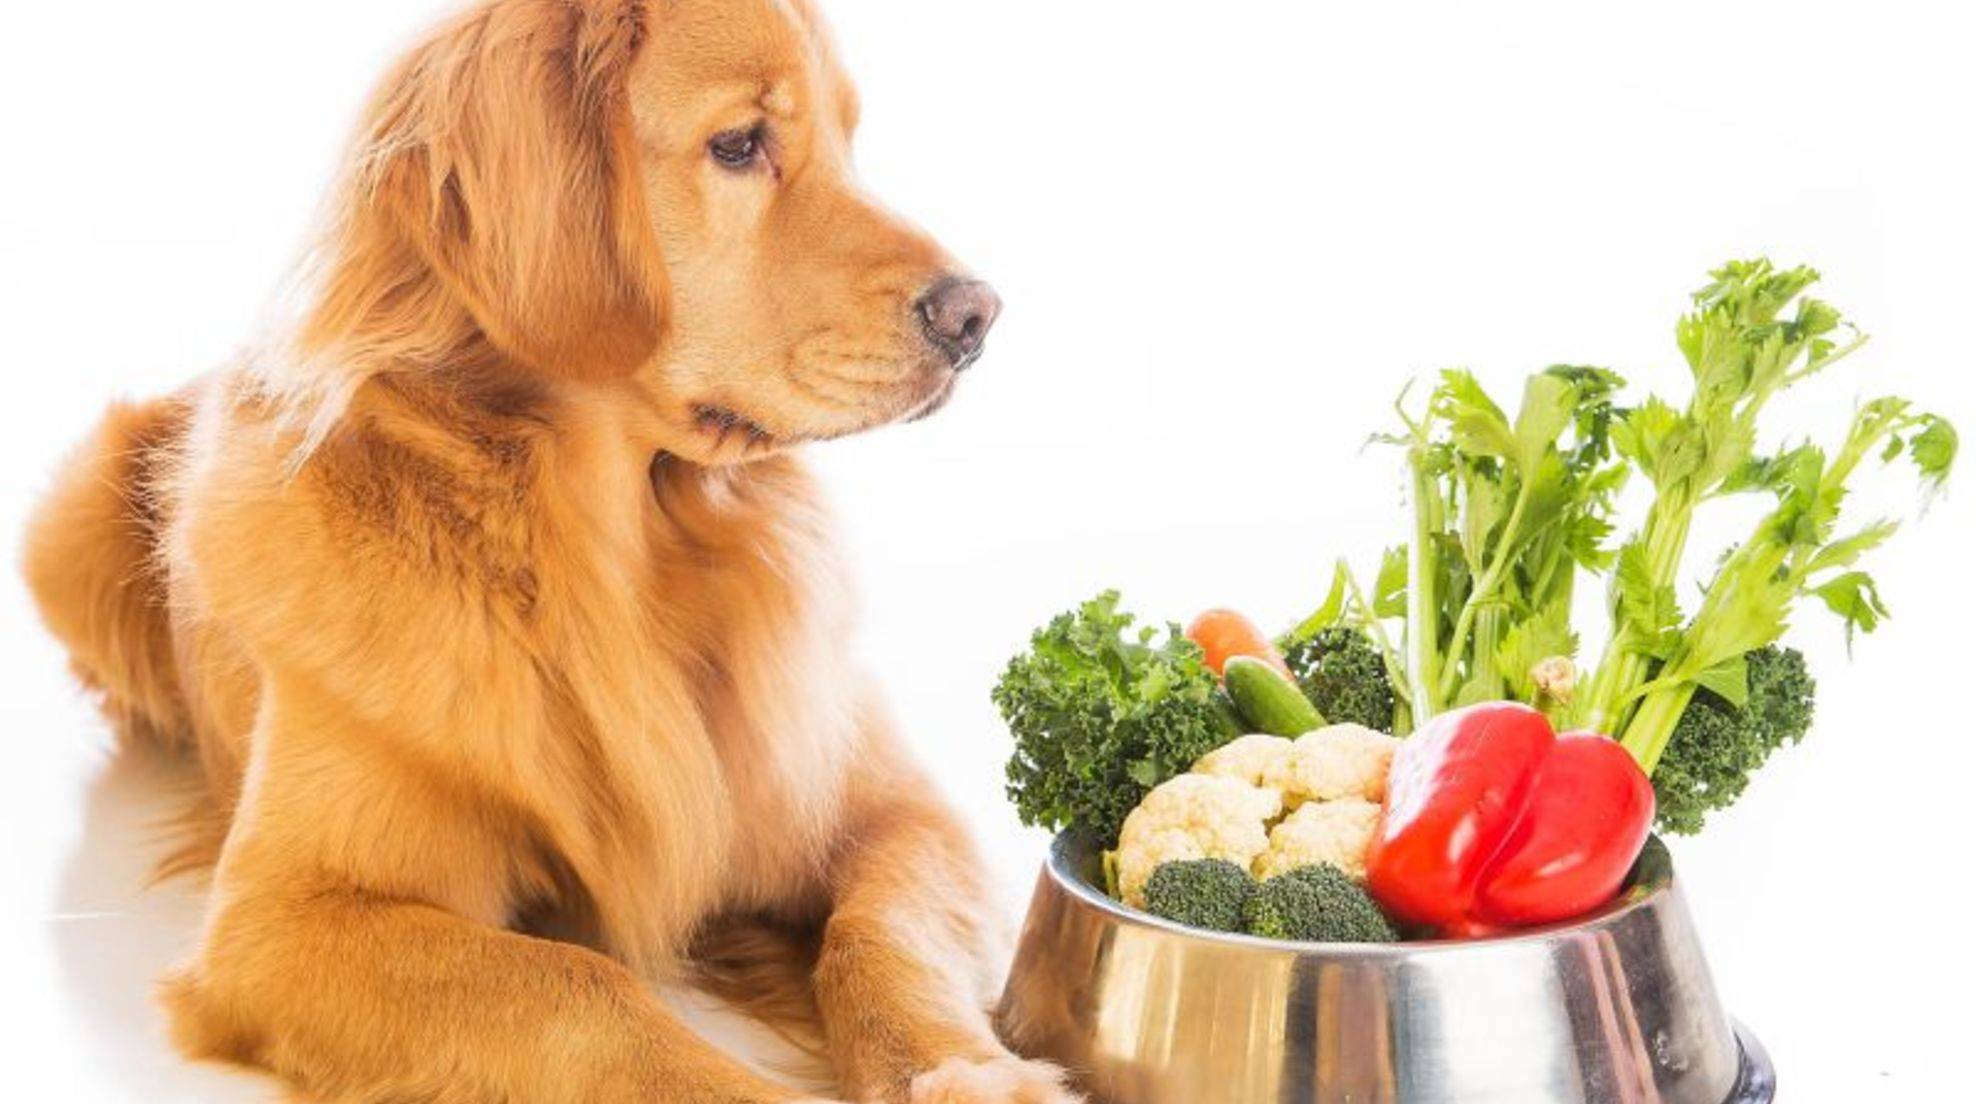 Vegetables for dogs: what to look for